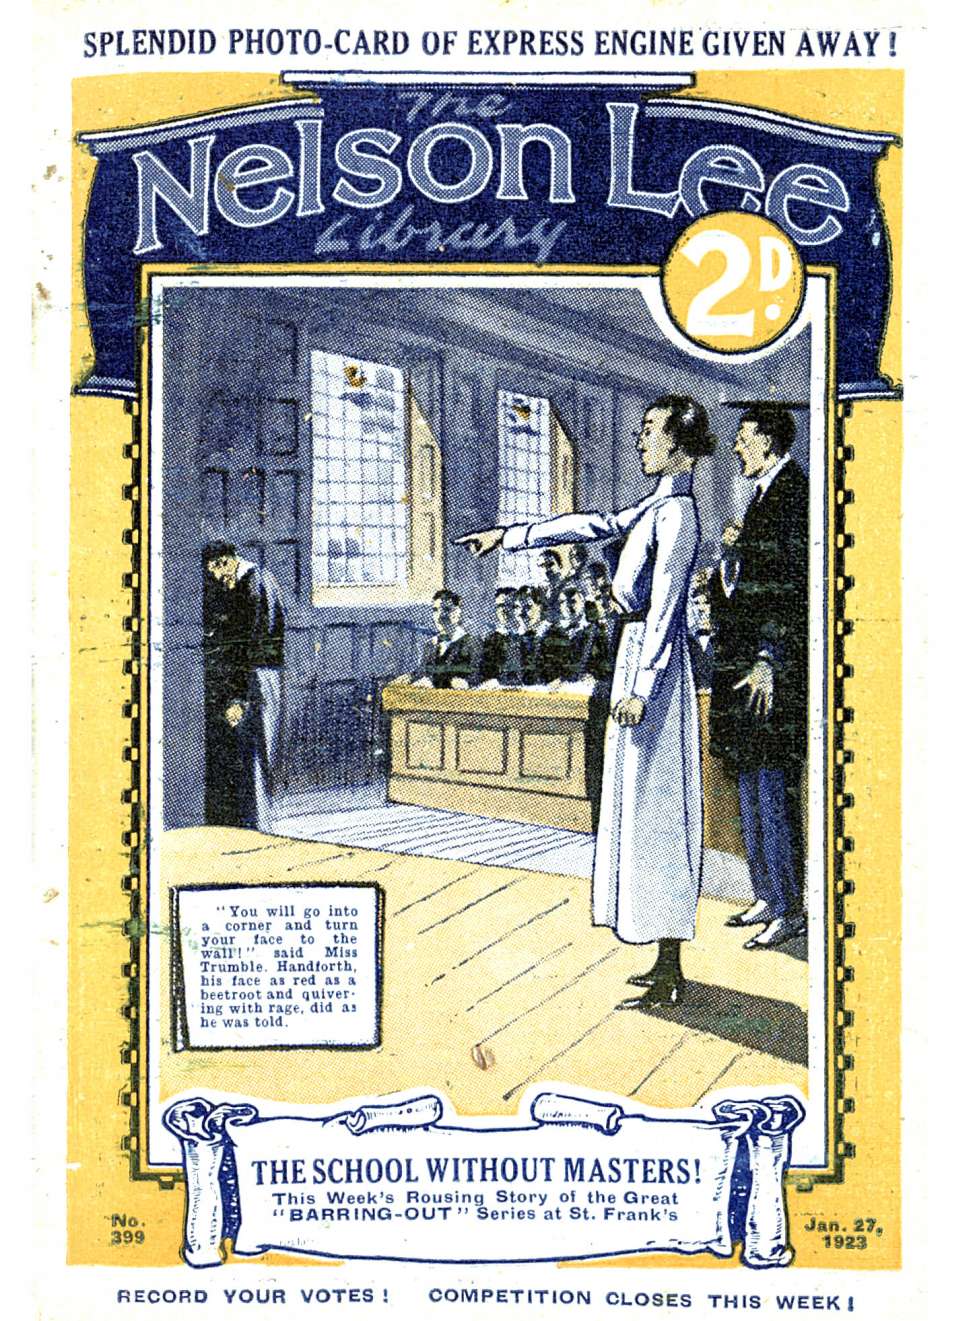 Comic Book Cover For Nelson Lee Library s1 399 - The School Without Masters